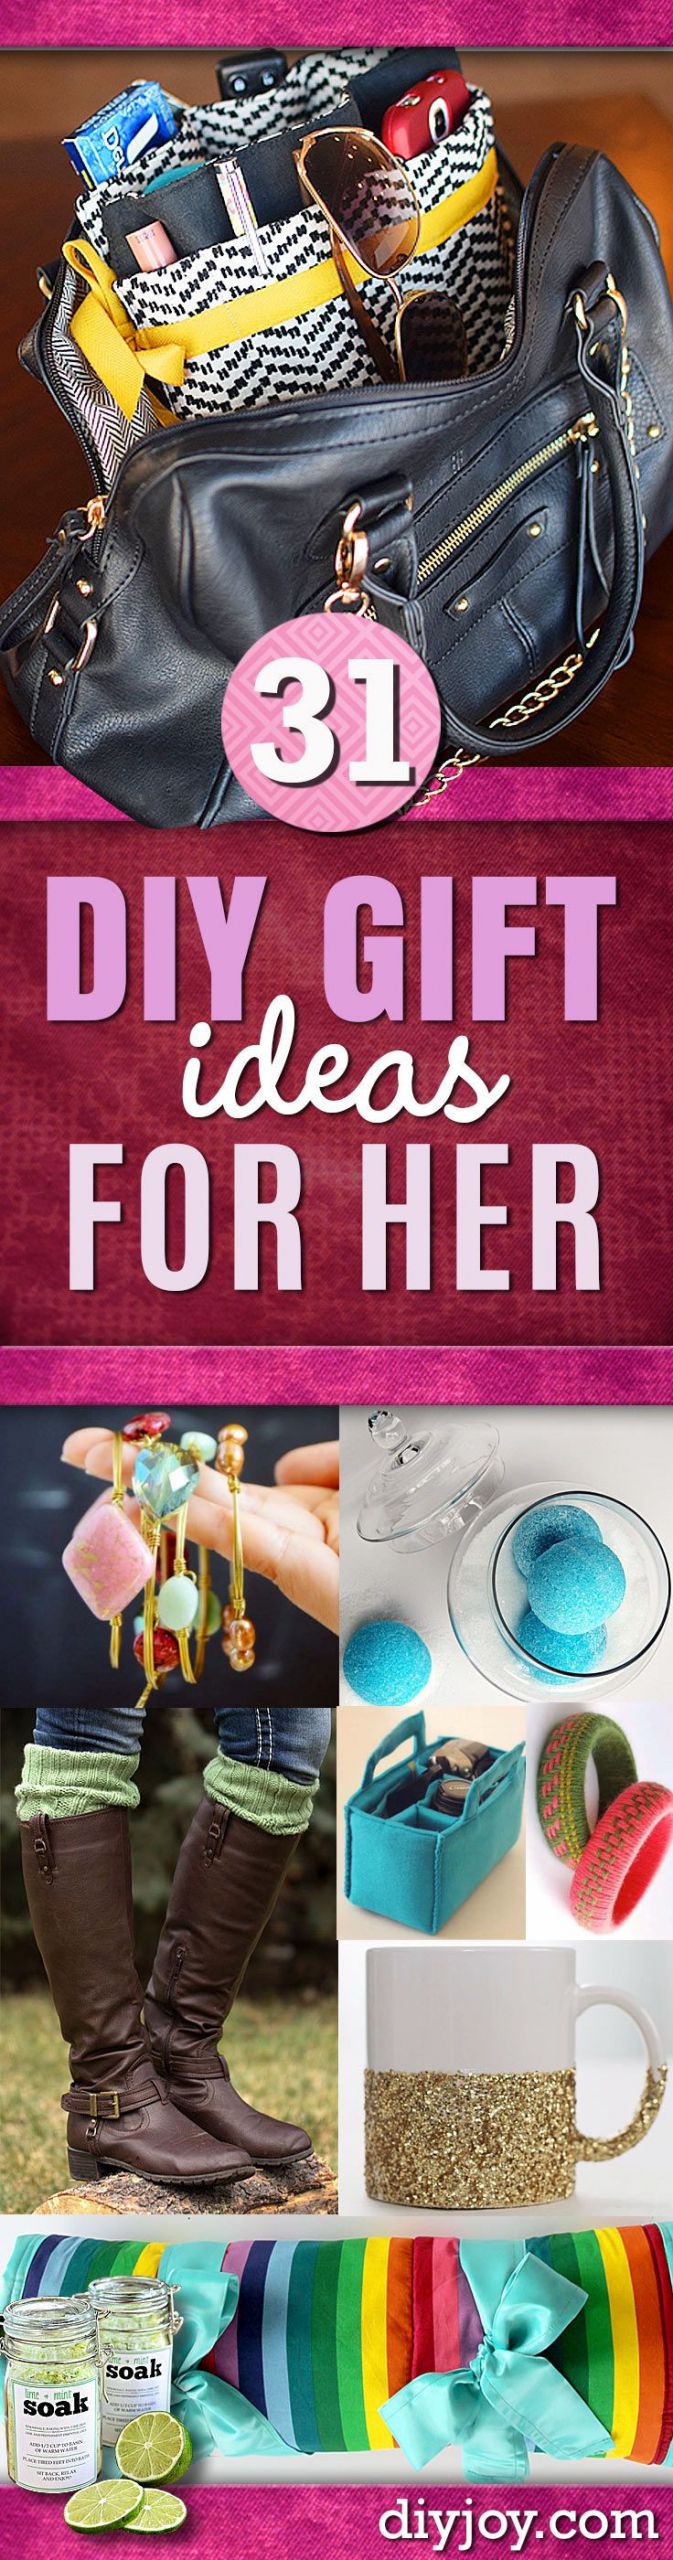 Gift Ideas To Make For Girlfriend
 Super Special DIY Gift Ideas for Her DIY JOY